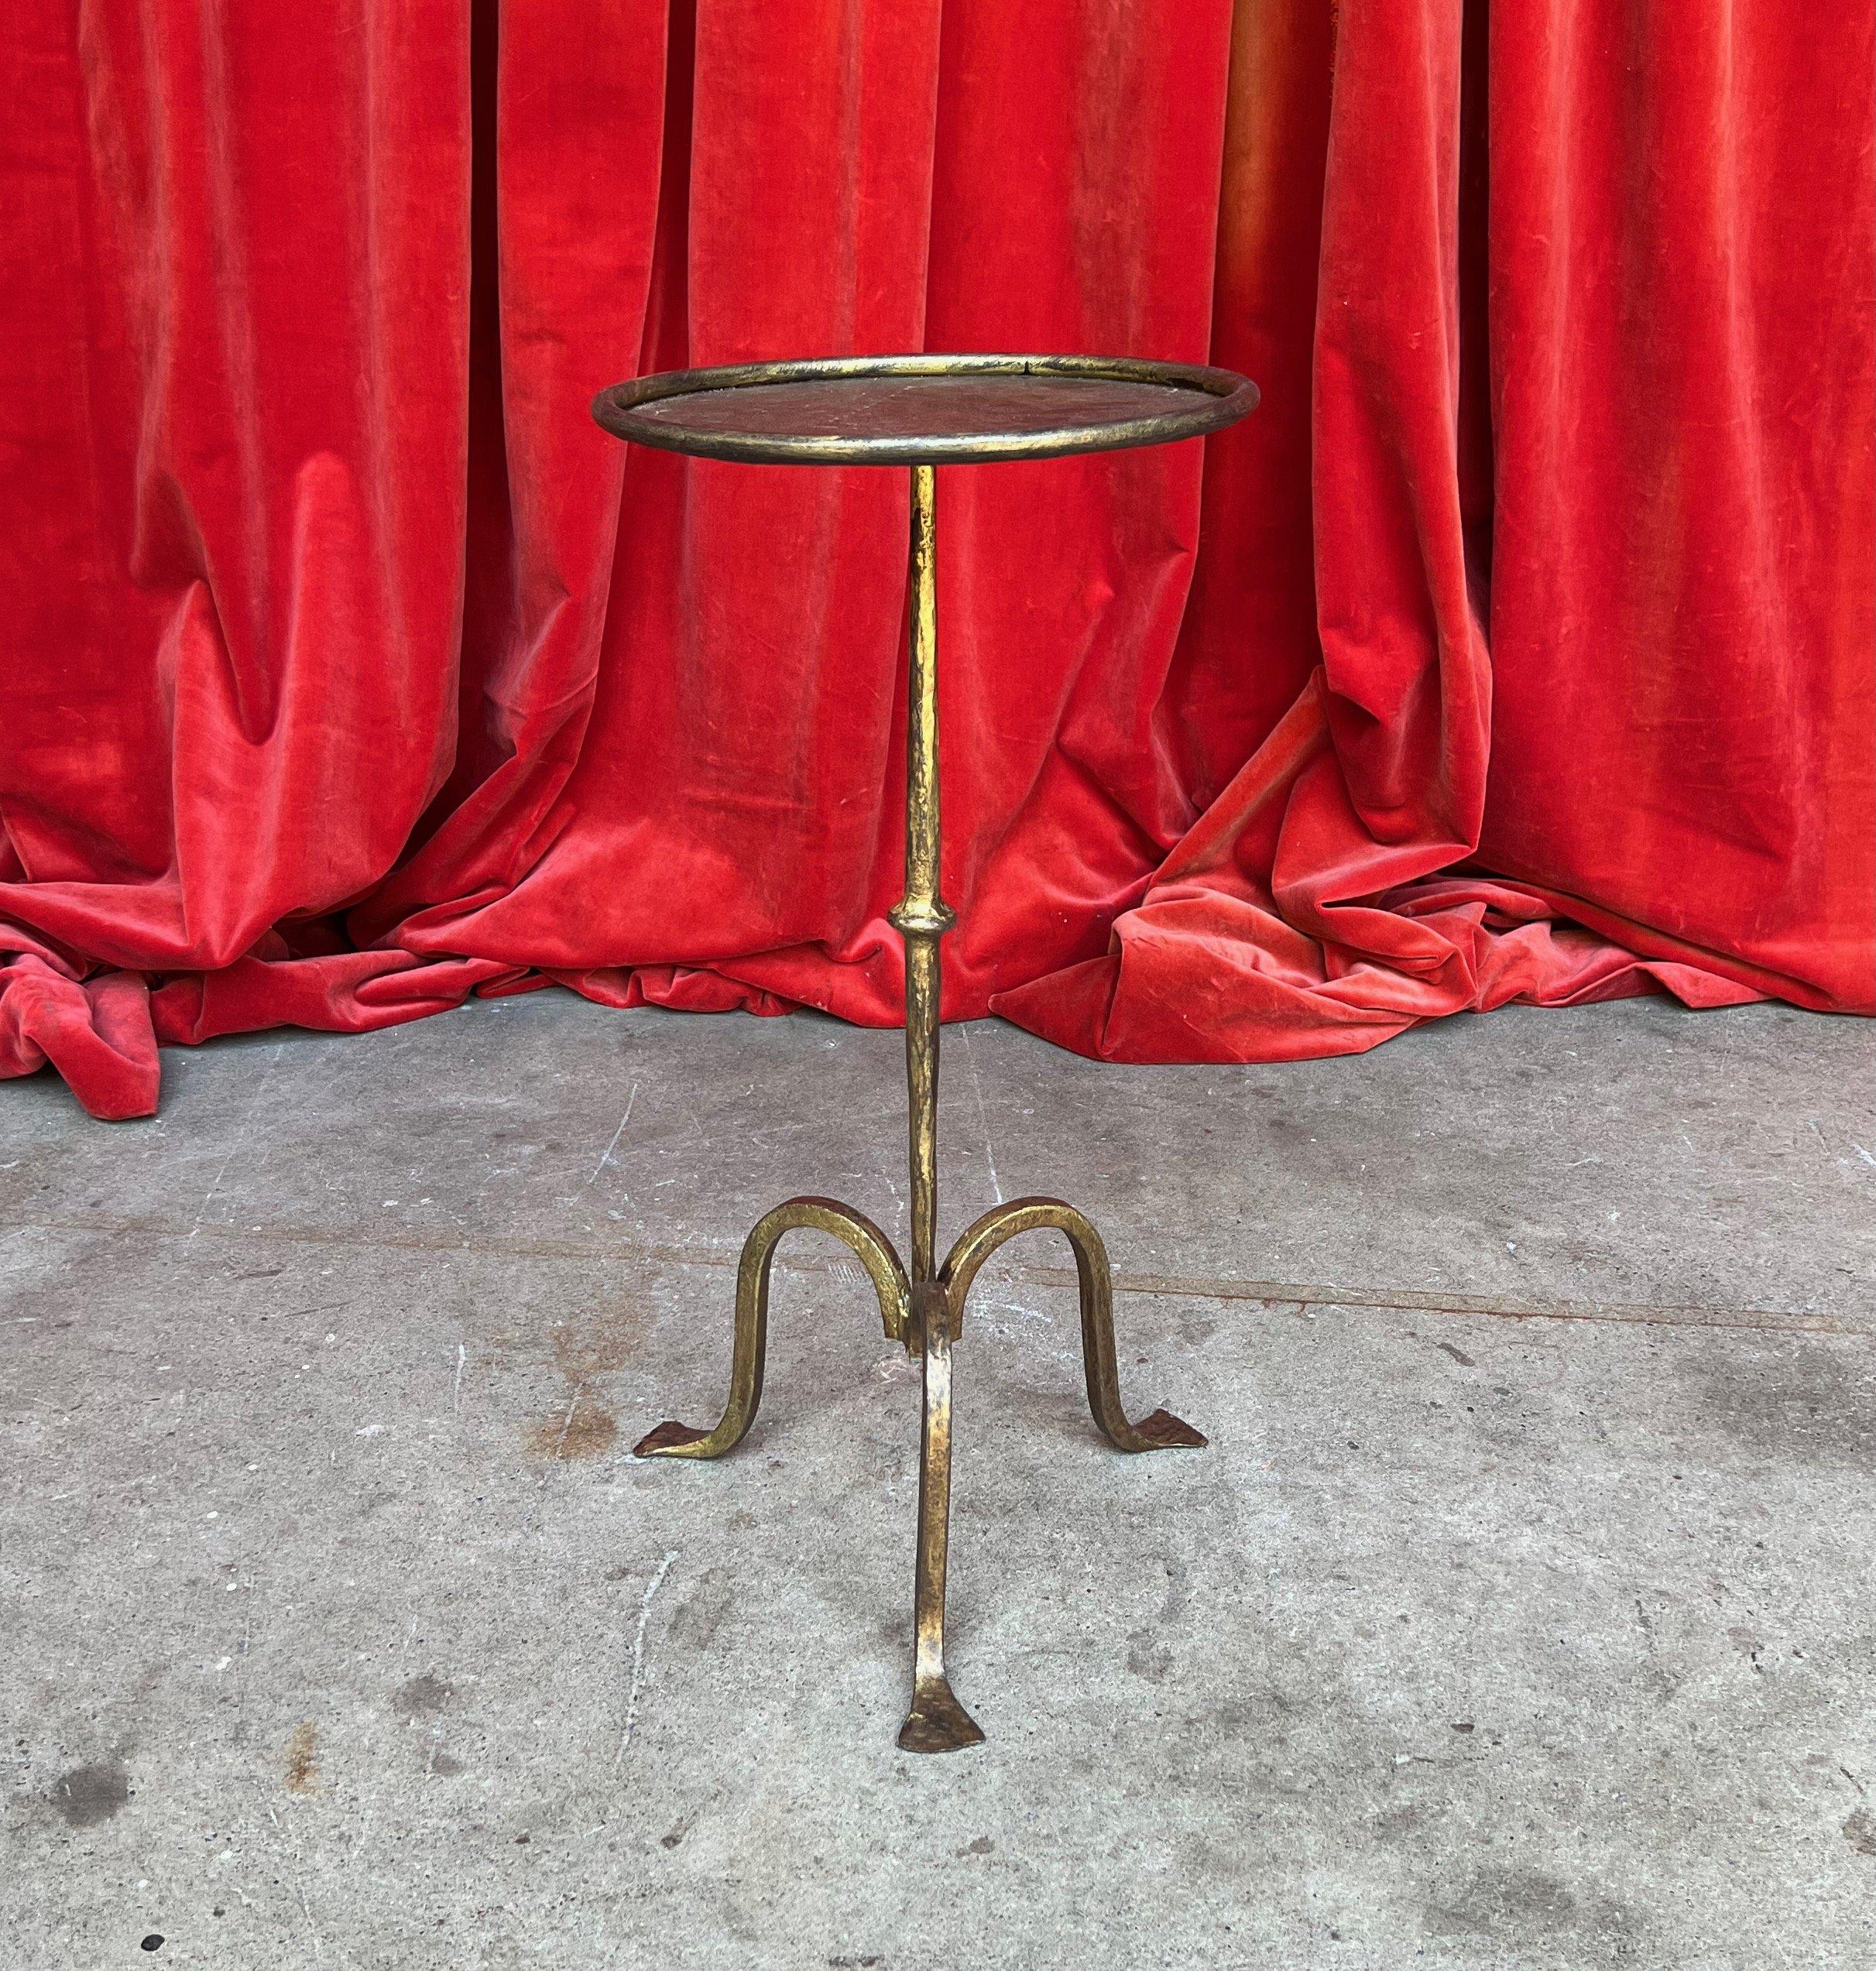 This recently crafted Spanish gilt iron martini table is a remarkable blend of aesthetics and functionality that elevates any living space. Recently created by accomplished artisans using traditional iron-working methods, this sophisticated drinks